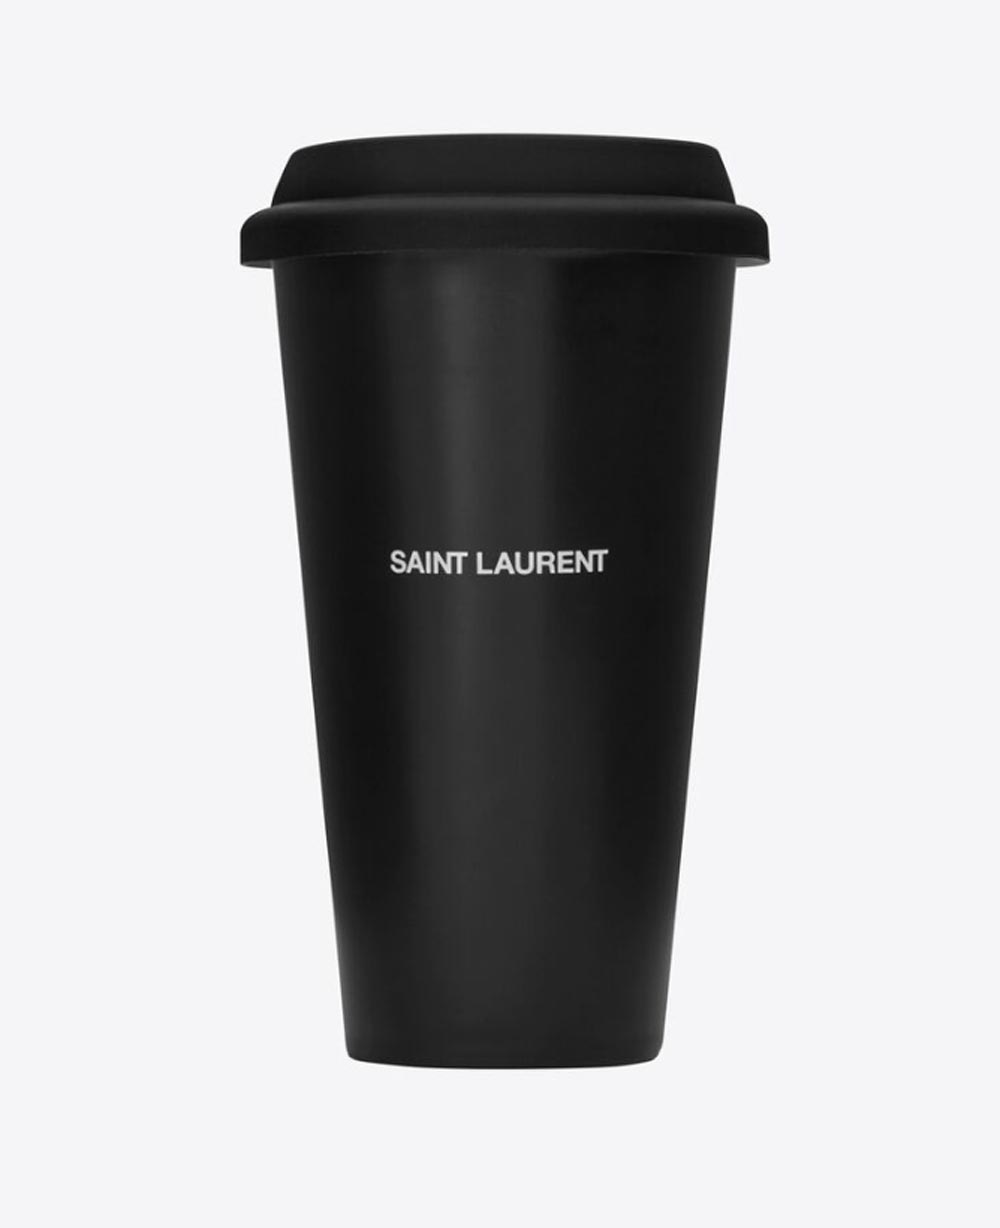 Affordable dupes of Anne, Heart's YSL coffee cup